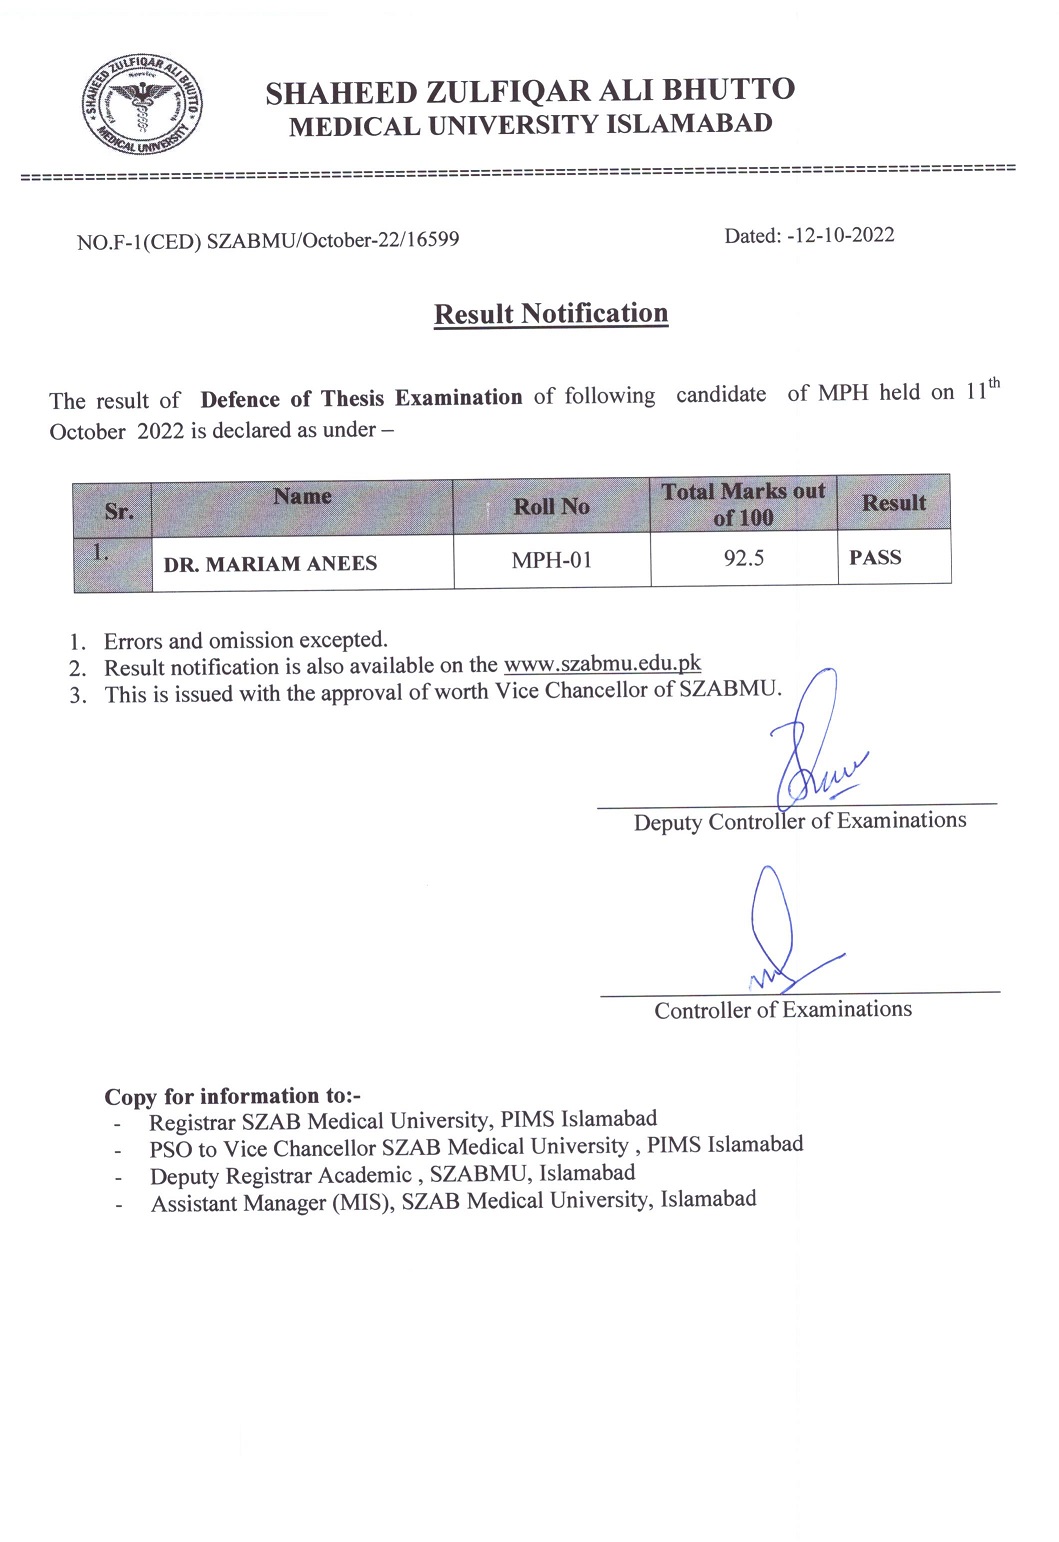 Result Notification of Defence of Thesis exam of MPH Held on 11th October 2022